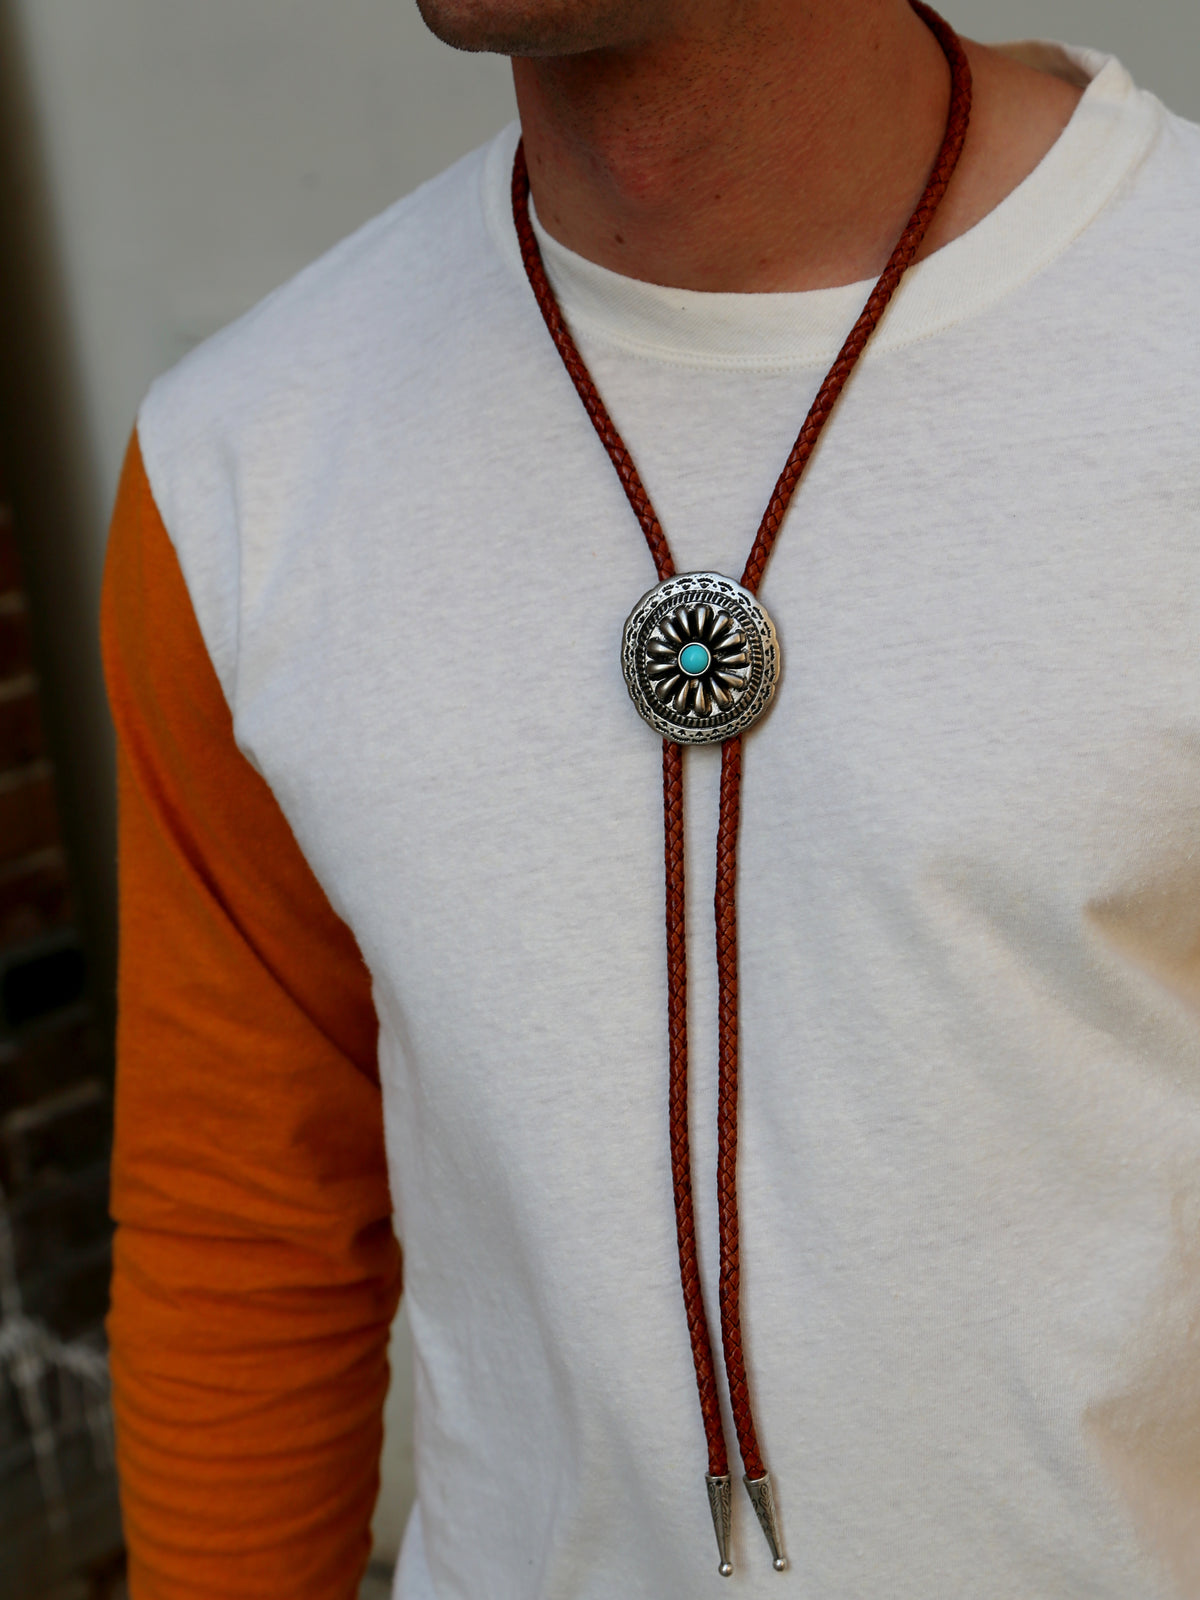 Nudie Jeans Nisse Bolo Tie - Turqouise Toffee Brow